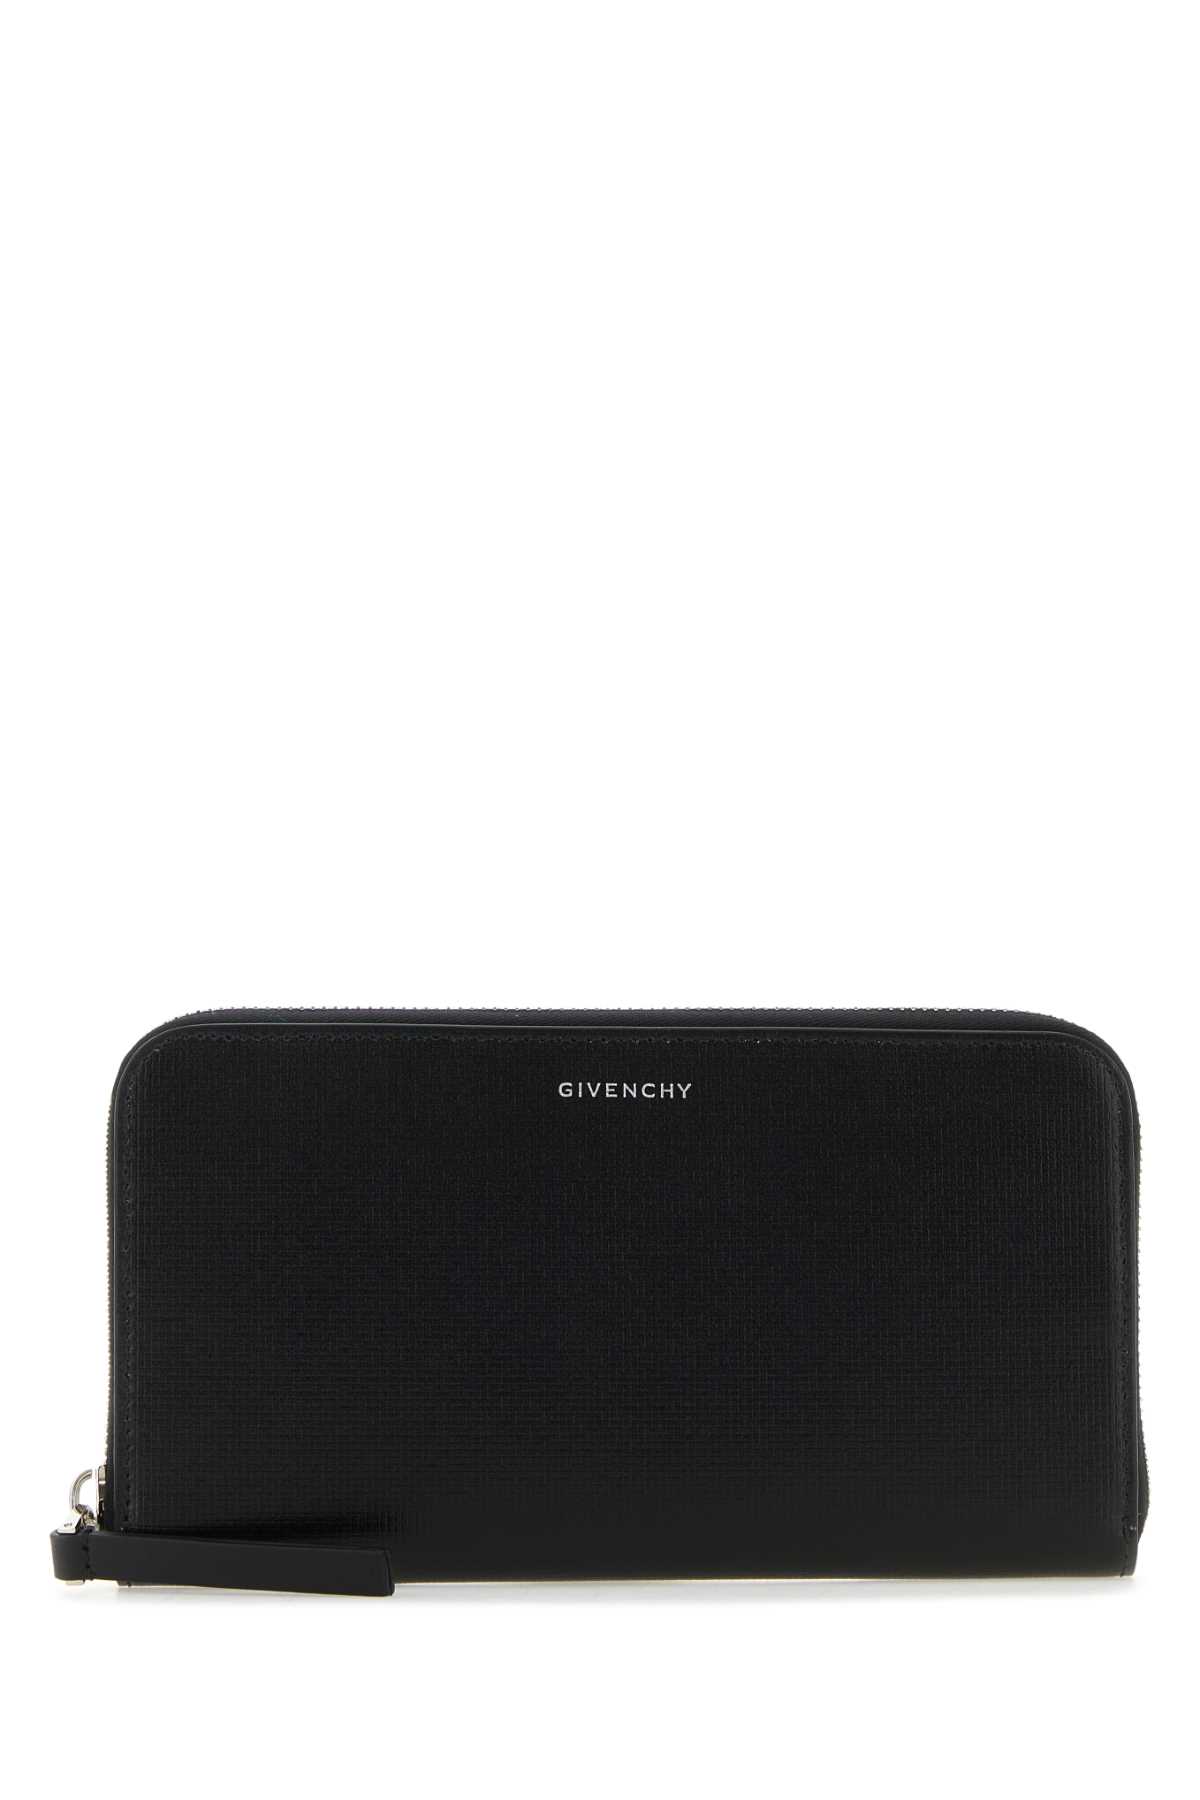 Givenchy Black Leather Wallet